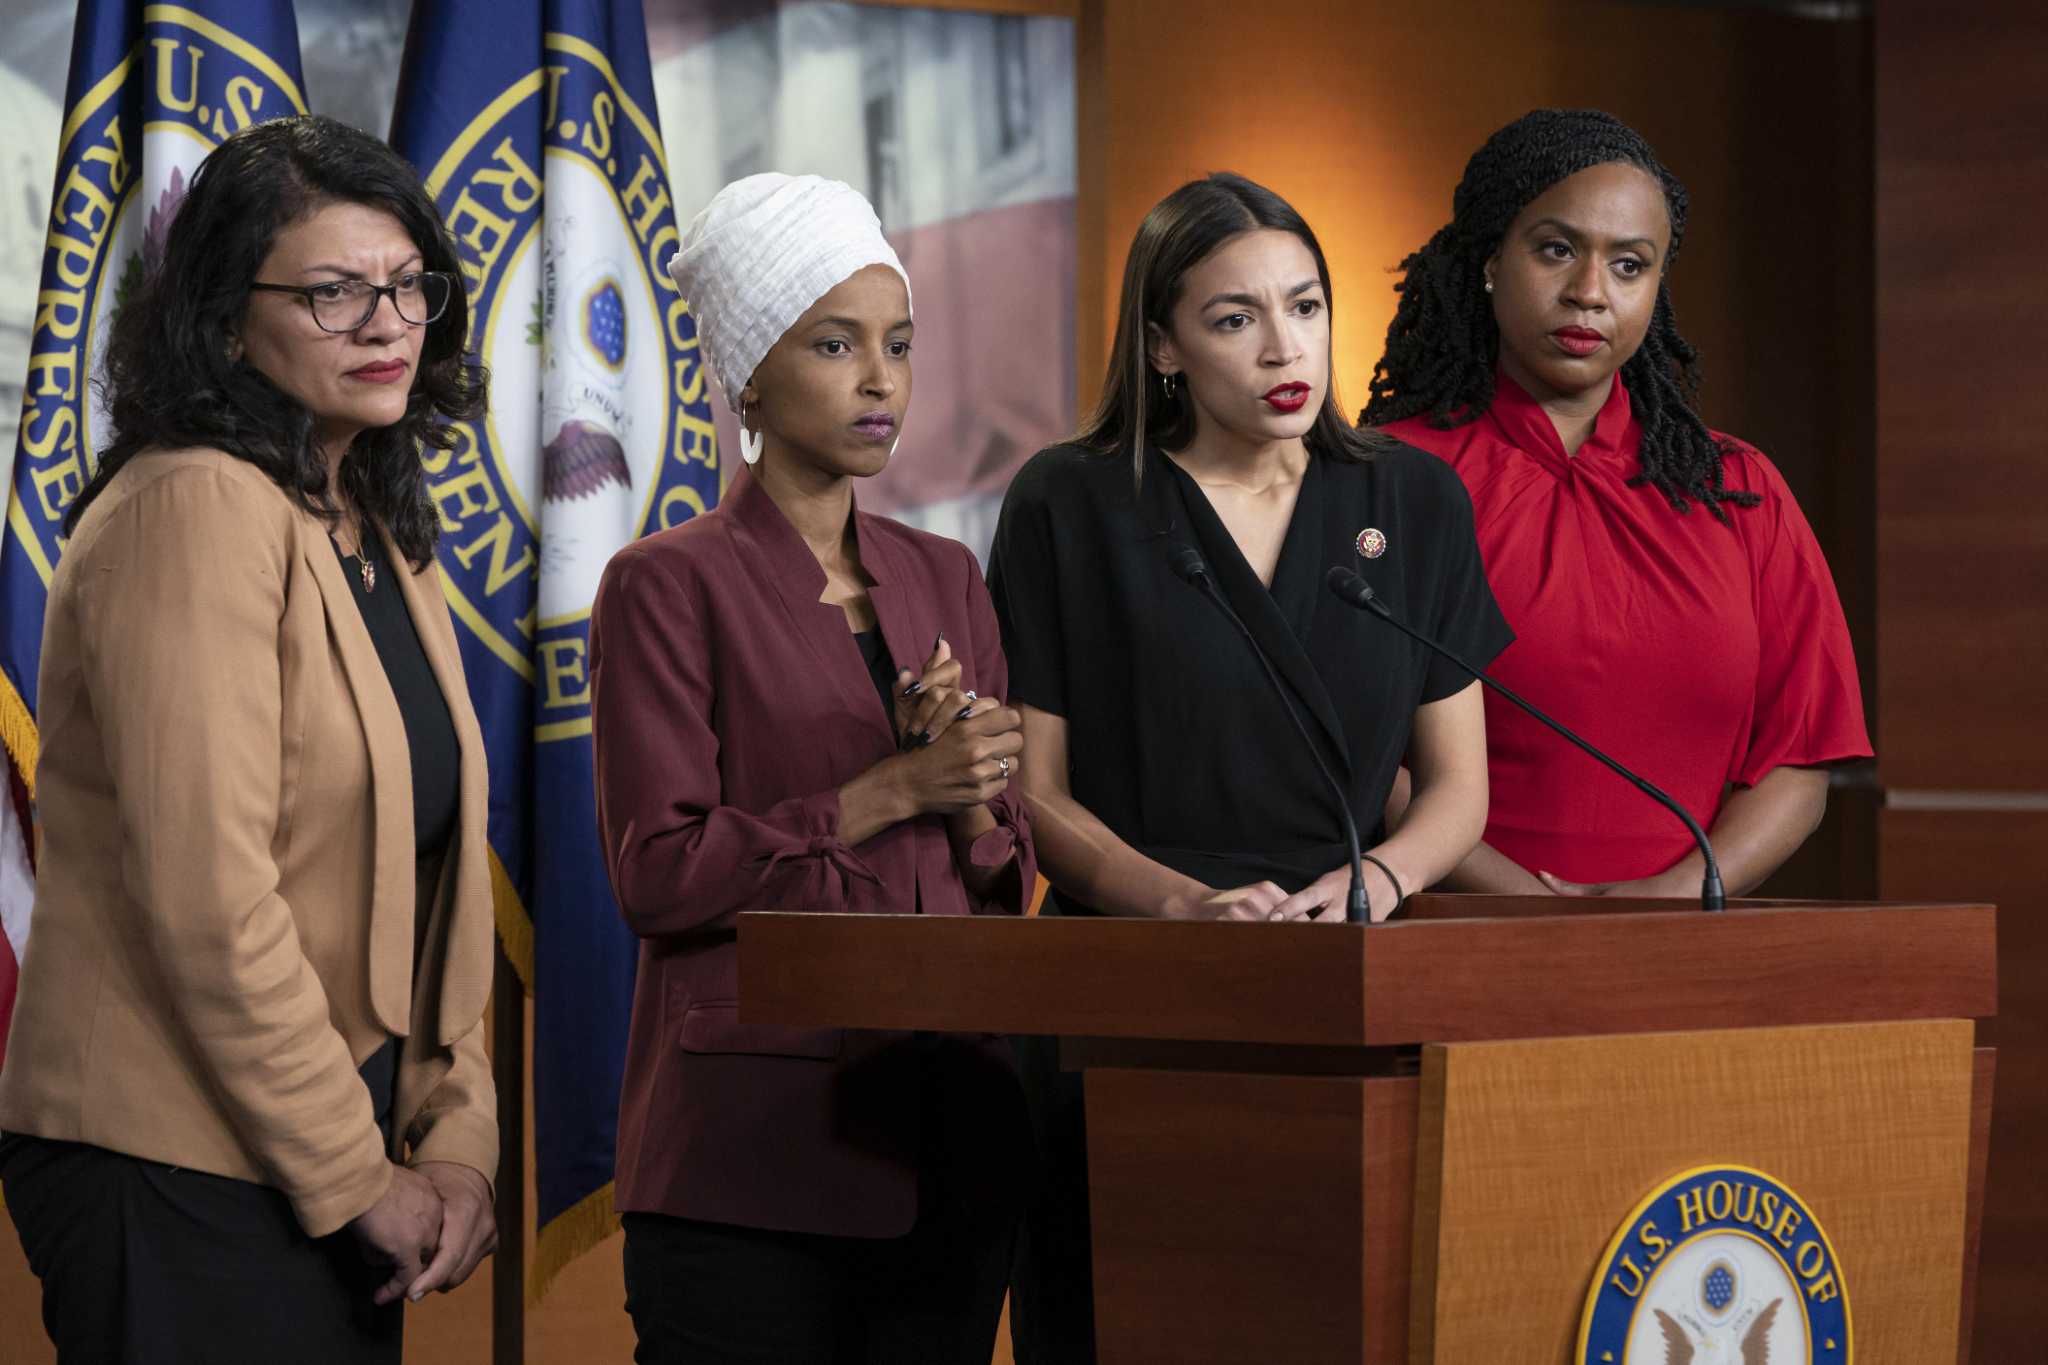 From left, Rep. Rashida Tlaib, D-Mich., Rep. llhan Omar, D-Minn., Rep. Alexandria Ocasio-Cortez, D-N.Y., and Rep. Ayanna Pressley, D-Mass., respond to remarks by President Donald Trump after his call for the four Democratic congresswomen to go back to their "broken" countries, during a news conference at the Capitol in Washington, Monday, July 15, 2019. All are American citizens and three of the four were born in the U.S. (AP Photo/J. Scott Applewhite)